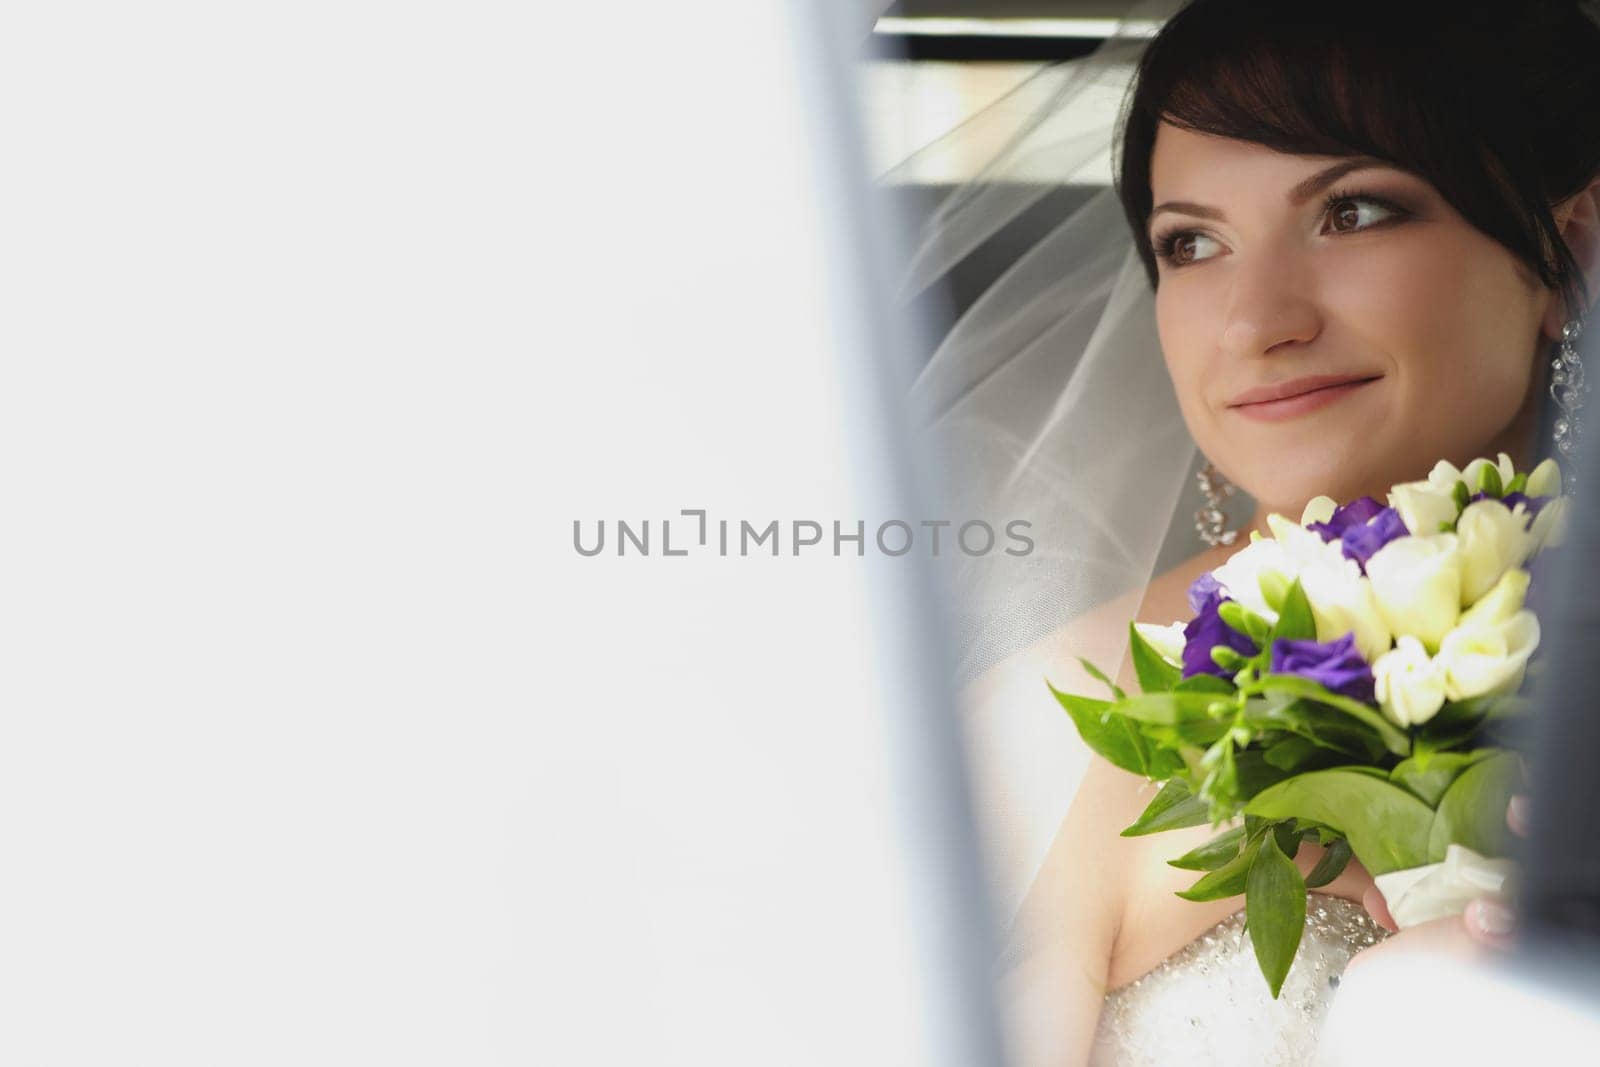 Bride in close-up with a bouquet of flowers by Mastak80